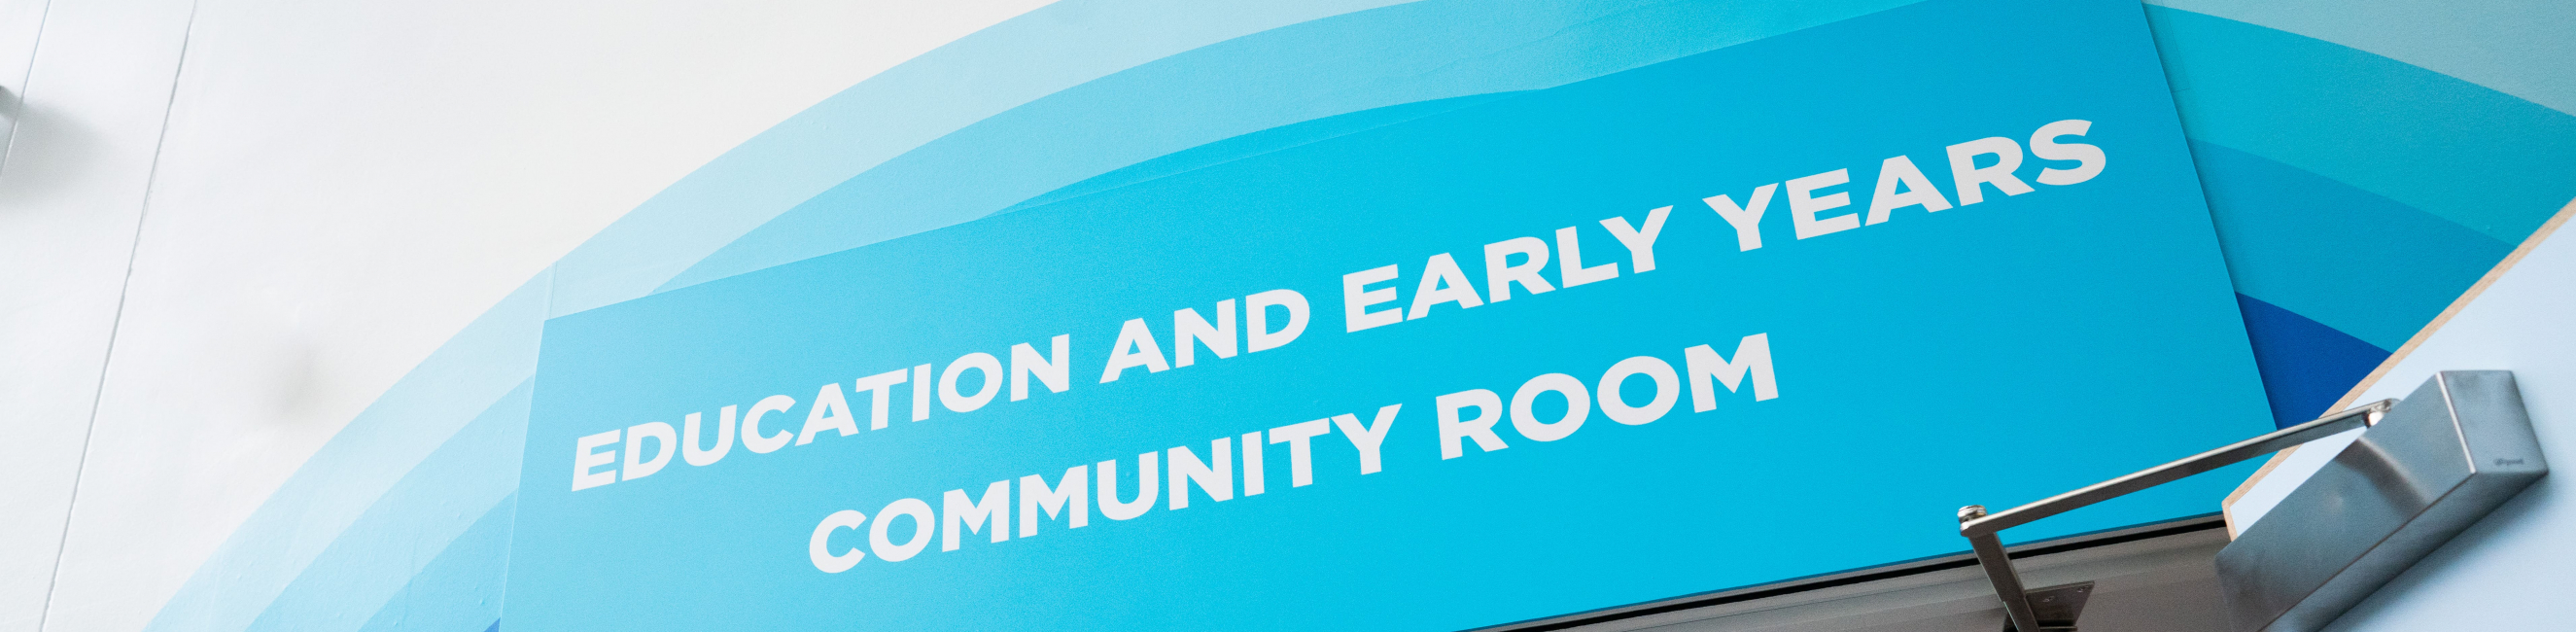 Education and Early Years Community Room sign